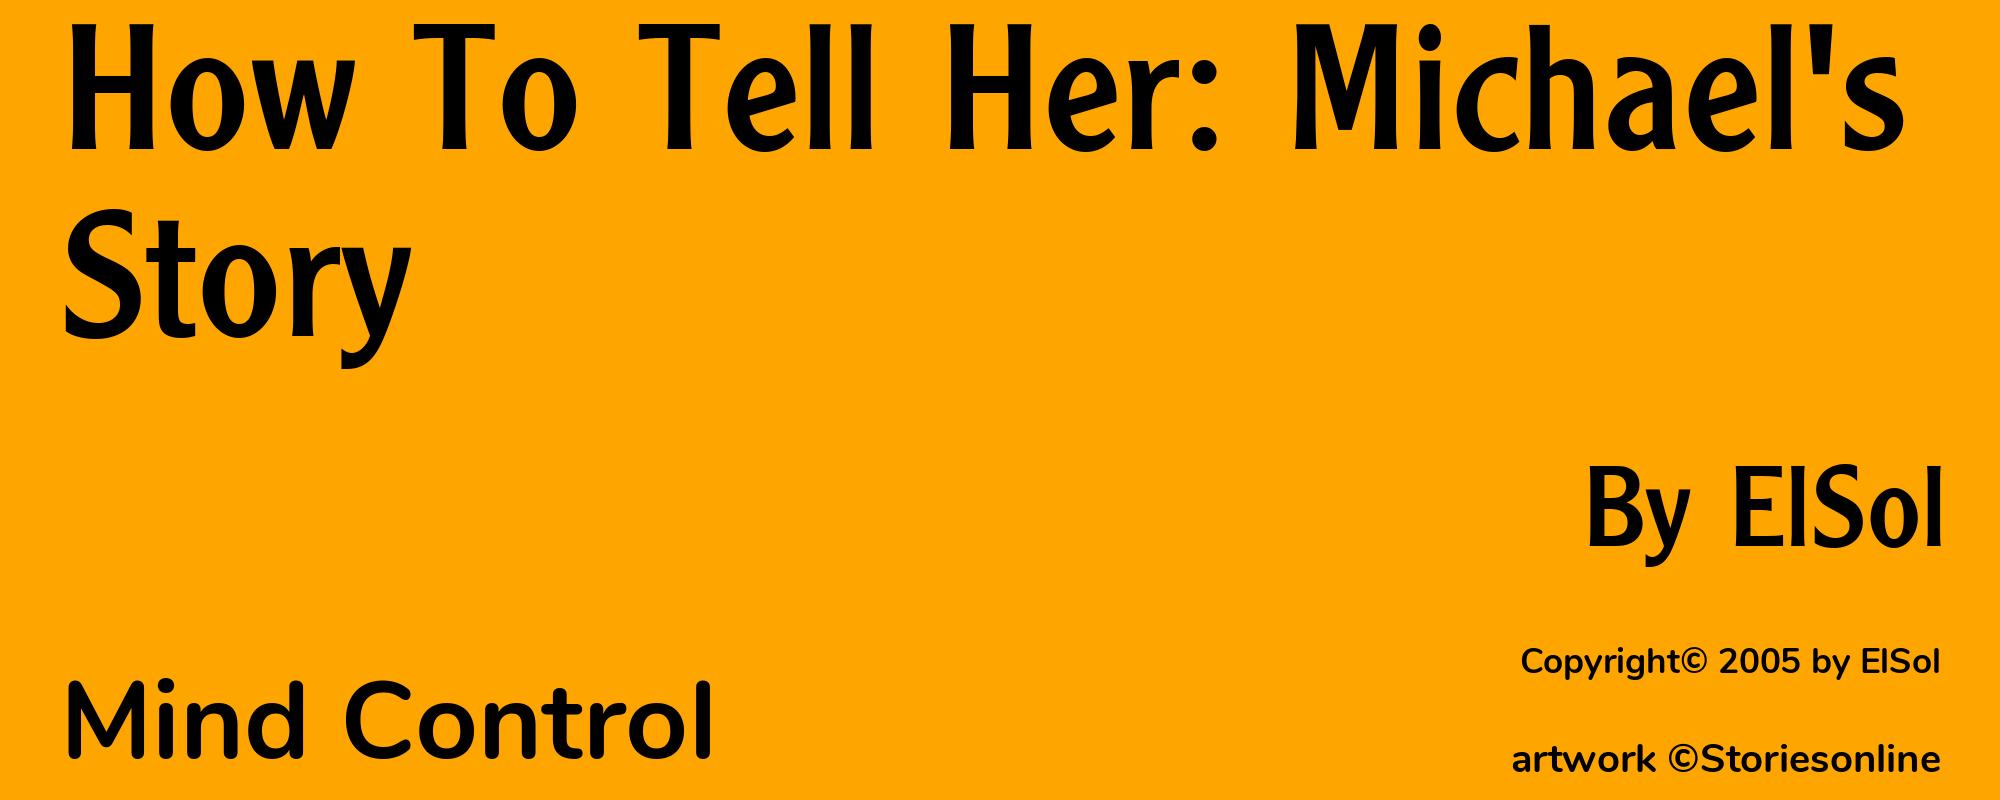 How To Tell Her: Michael's Story - Cover